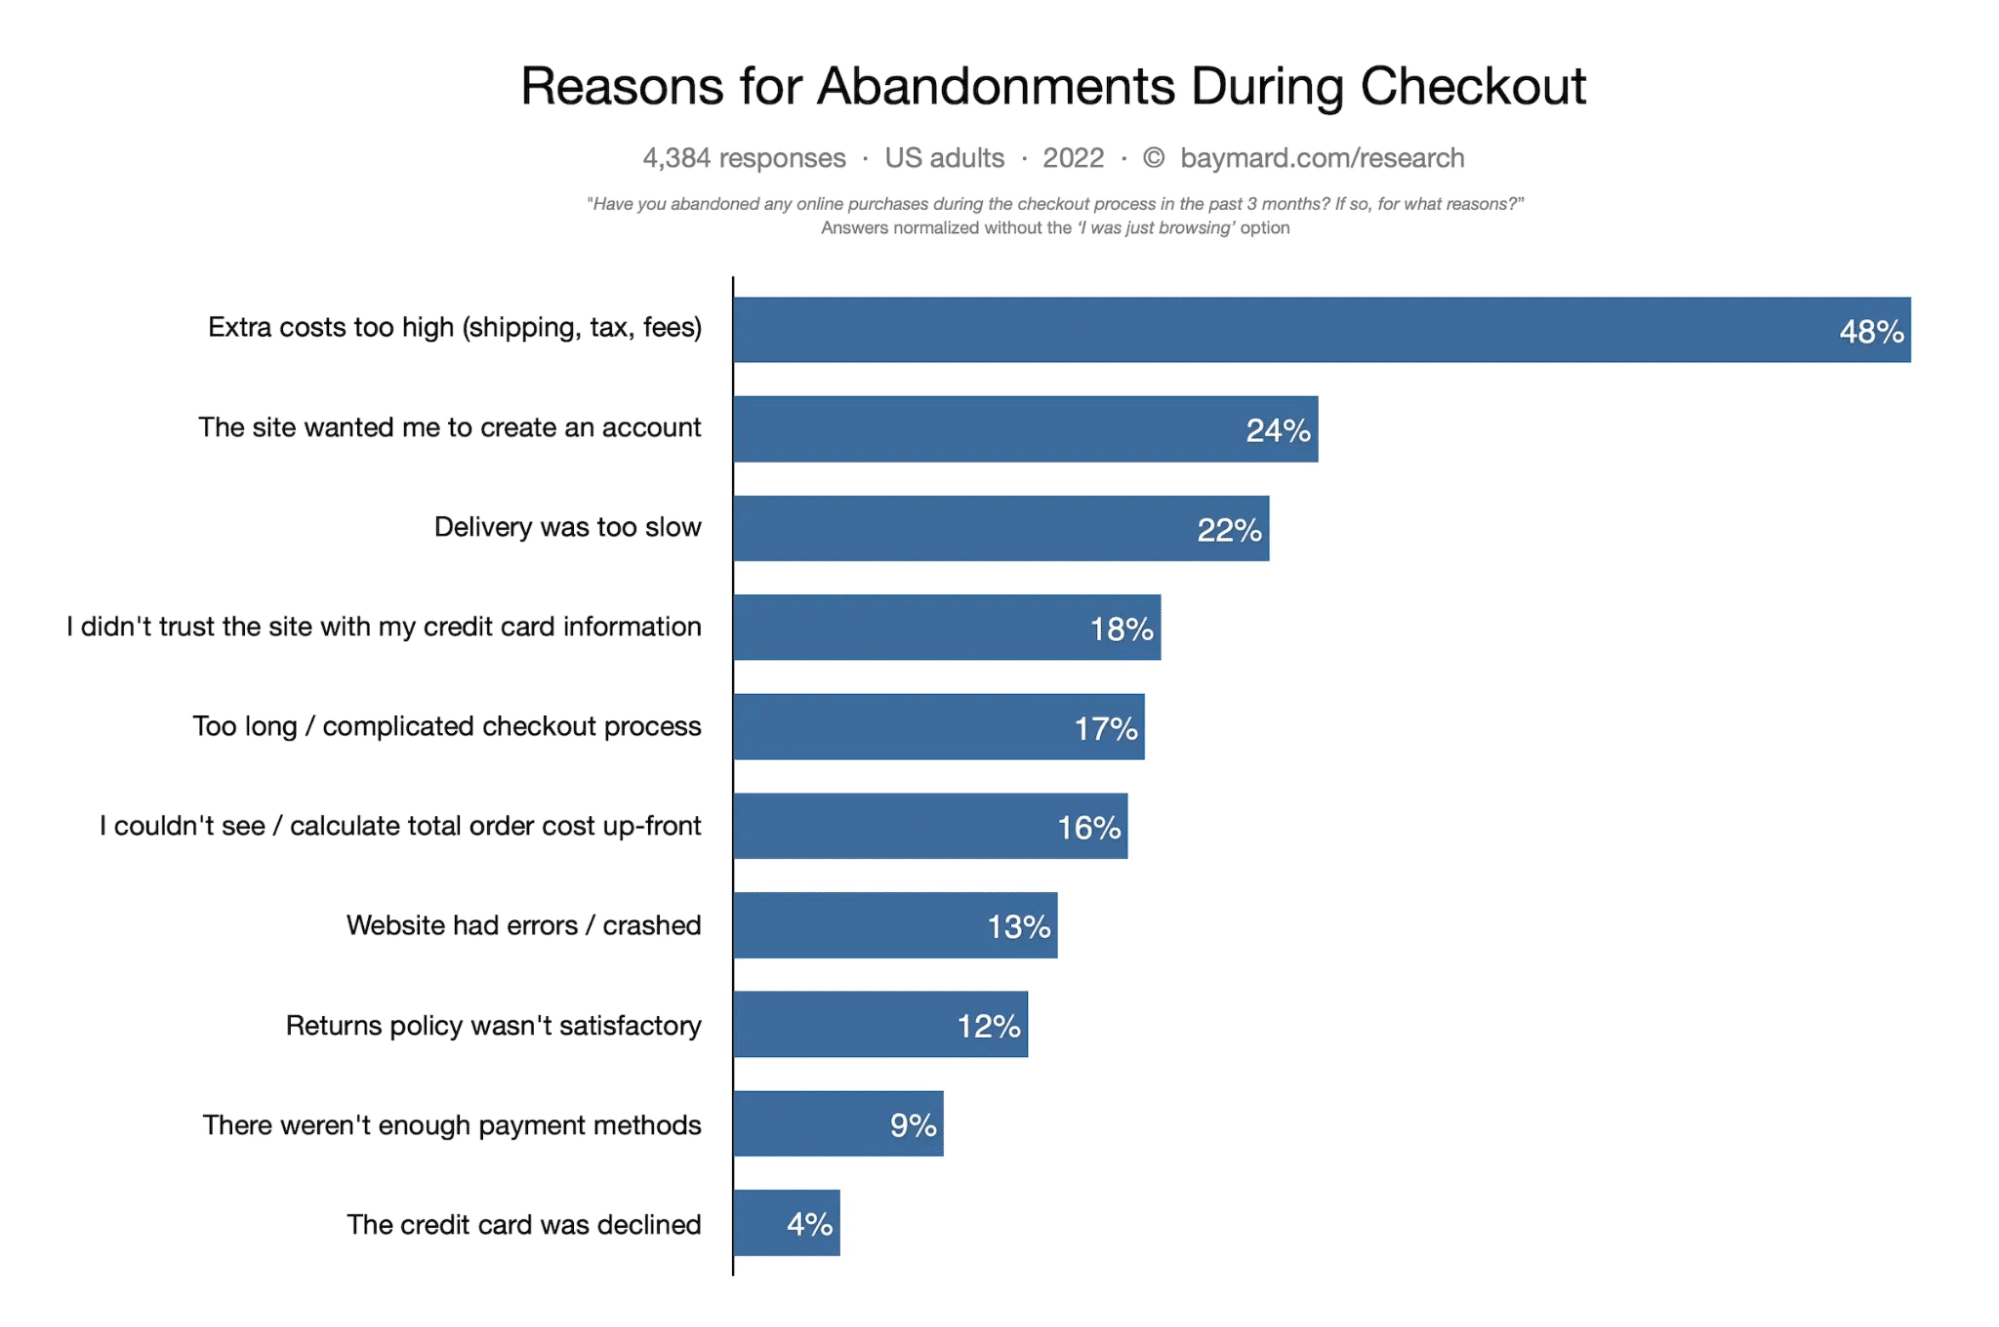 Reasons for abandonment during e-commerce checkout.